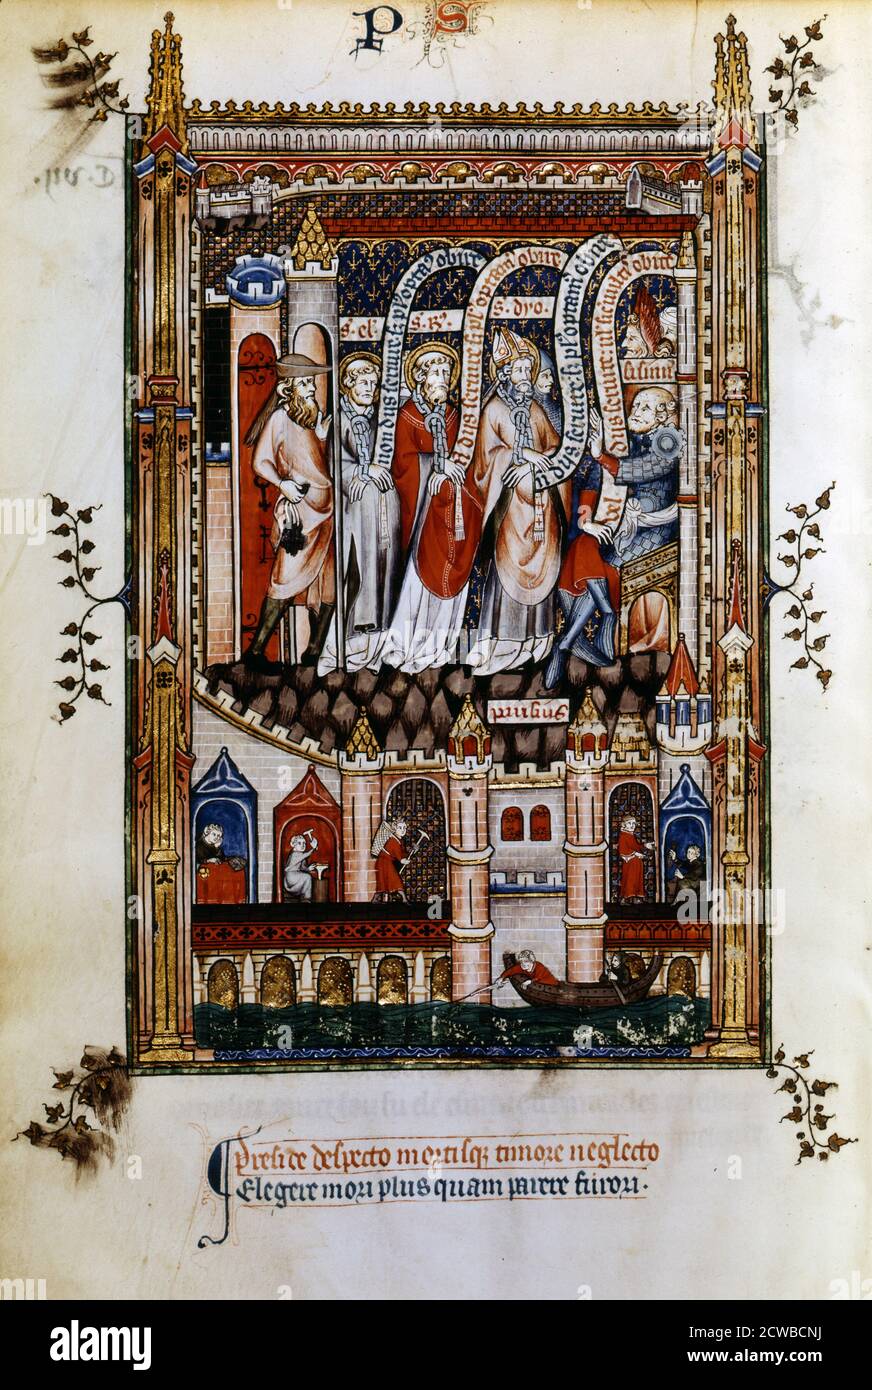 St Denis, St Rusticus and St Eleutherius taken by the gaoler to Sisinnius, 1317. Manuscript illustration from a work on the life of St Denis (died c258 AD), written by Yves, a monk at the Abbey of St Denis. The book depicts the torture and martyrdom of the saint by the Roman governor Fescenninus Sisinnius. From the collection of the Bibliotheque Nationale, Paris, the artist is unknown. Stock Photo